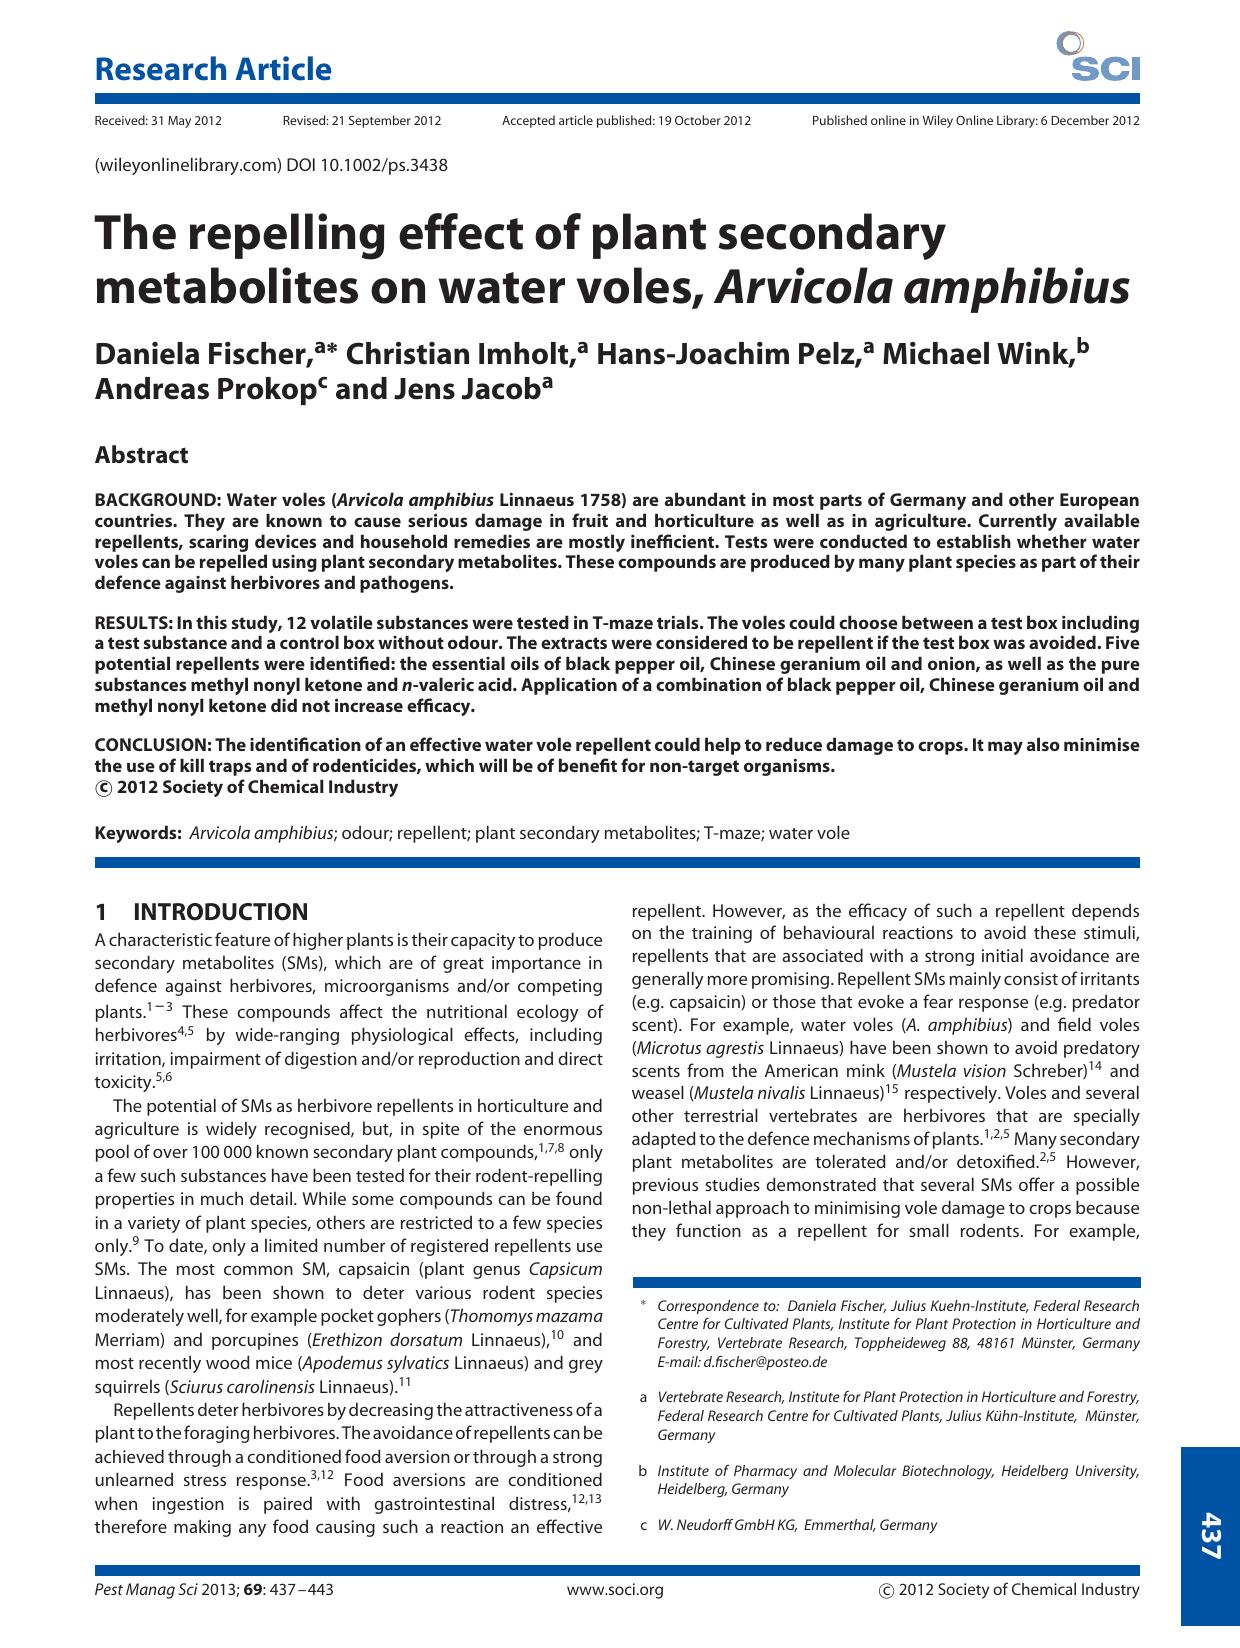 The repelling effect of plant secondary metabolites on water voles, Arvicola amphibius by Unknown